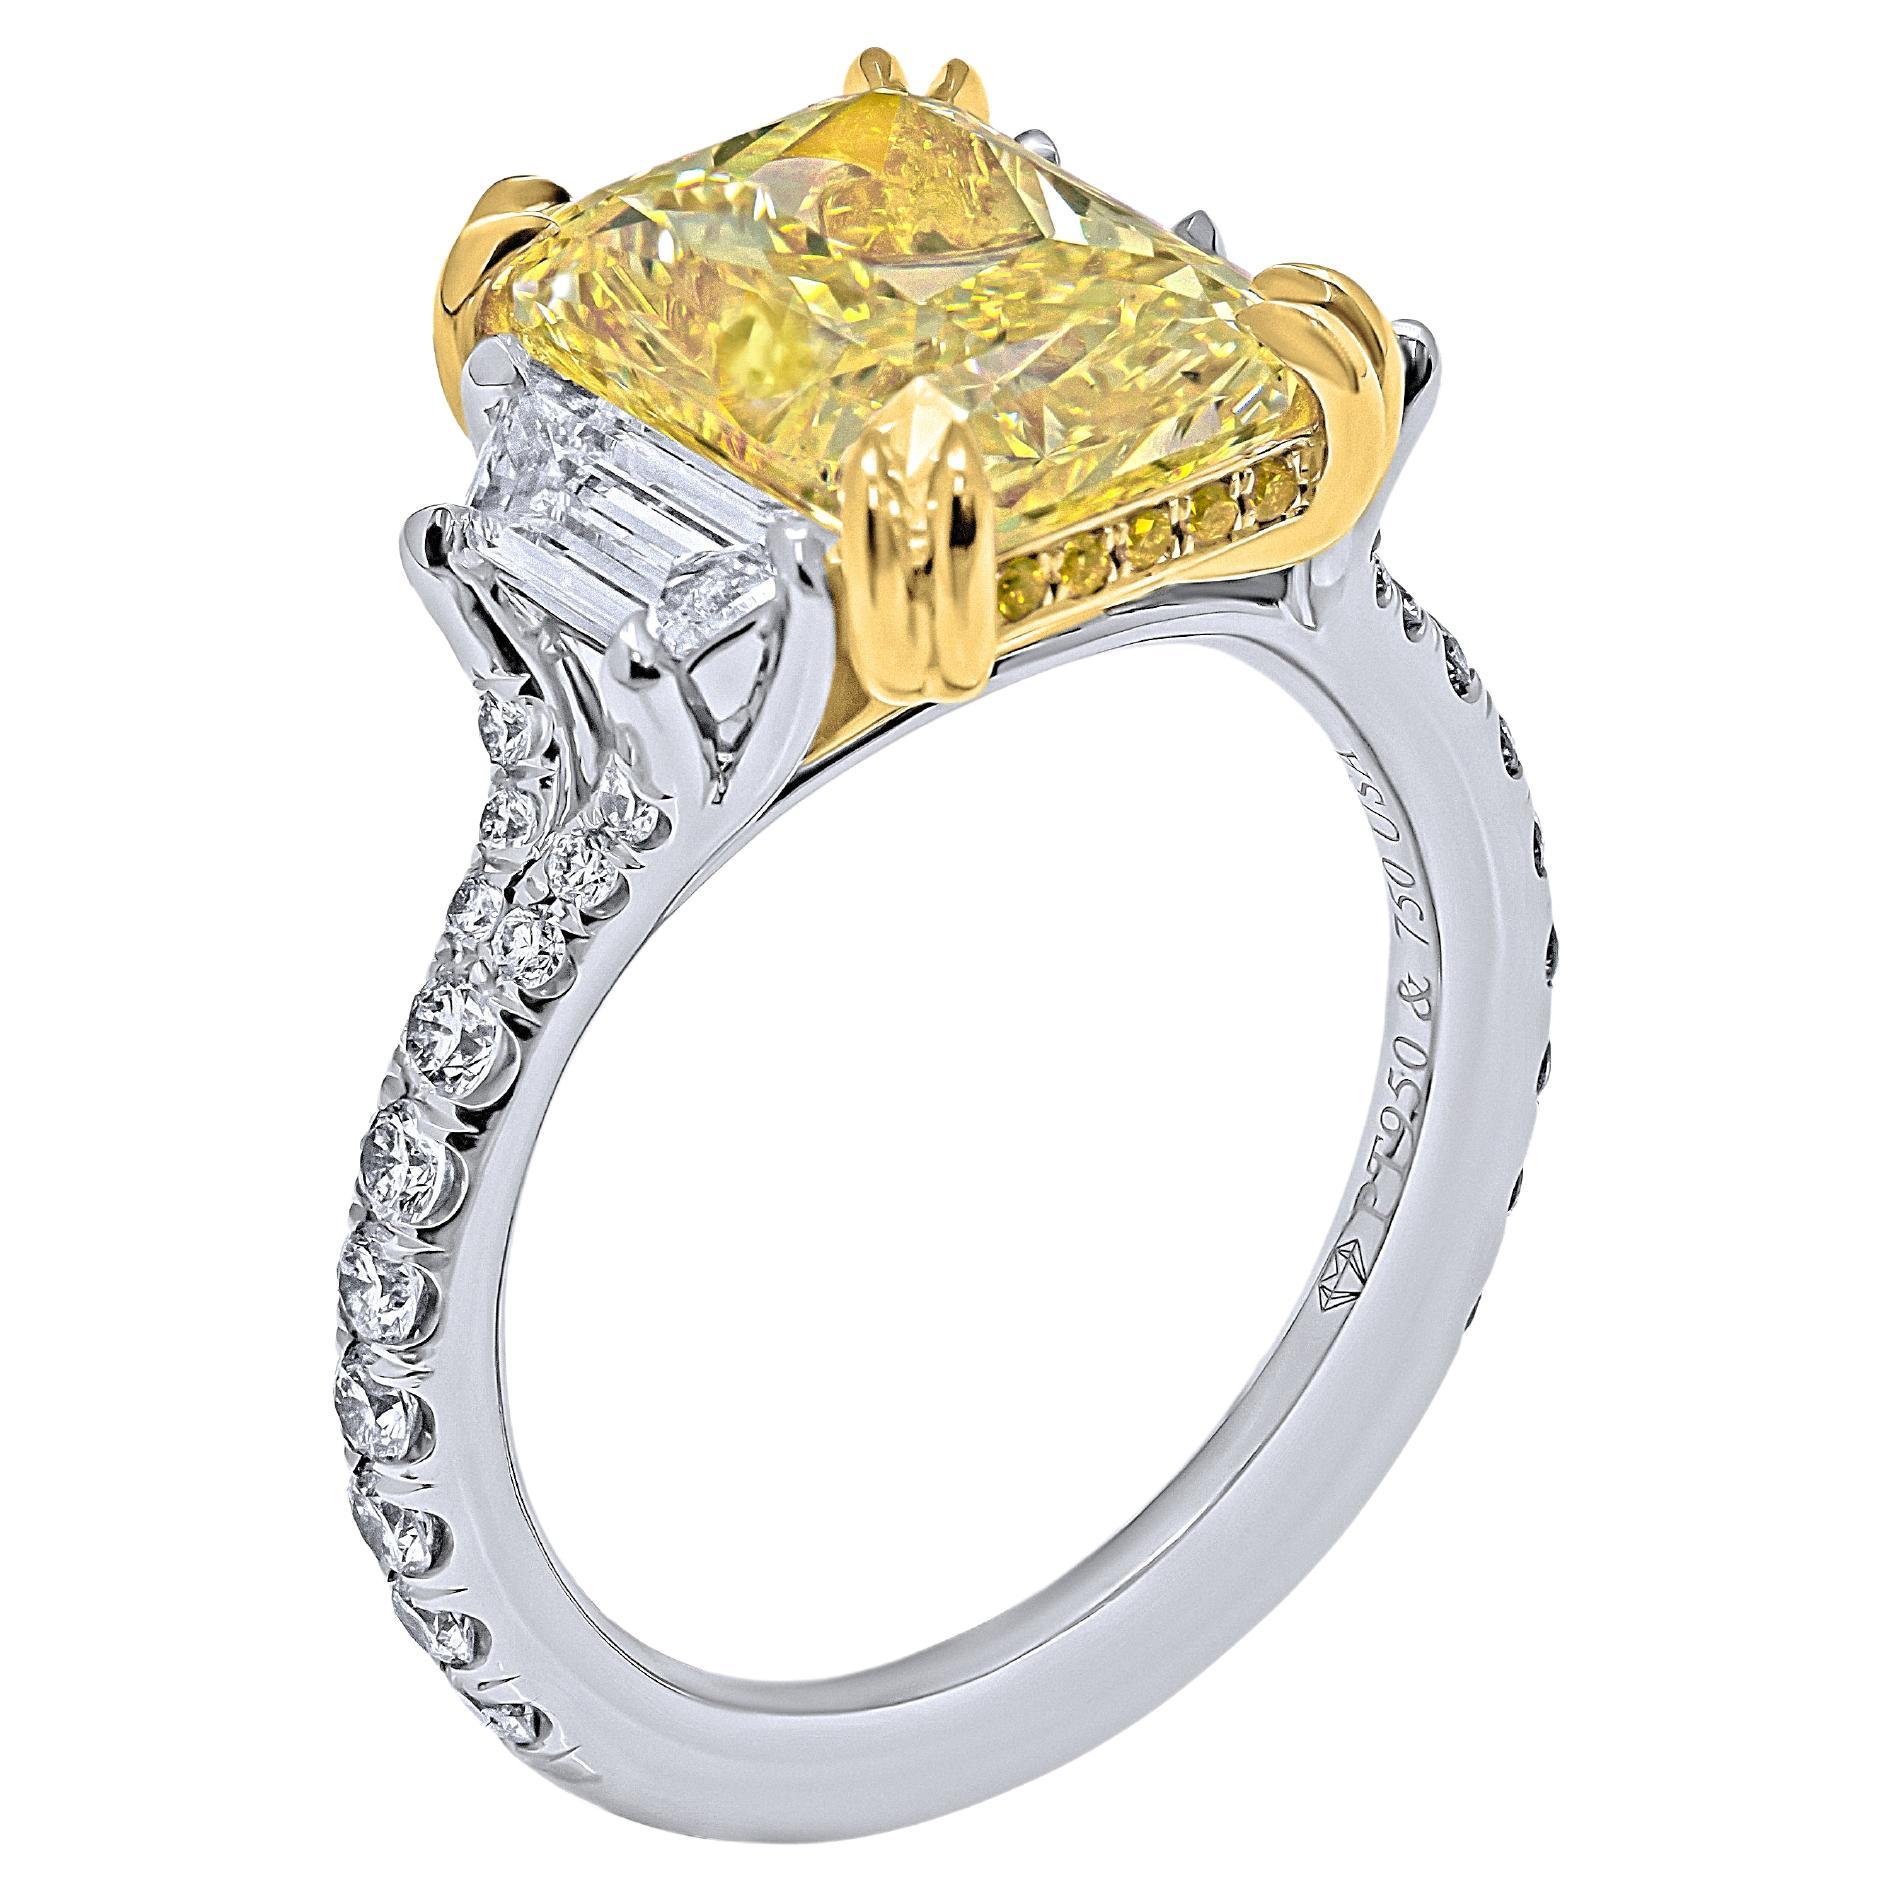 GIA Certified 3 Stone Ring with 5.02ct Fancy Intense Yellow Radiant Cut For Sale